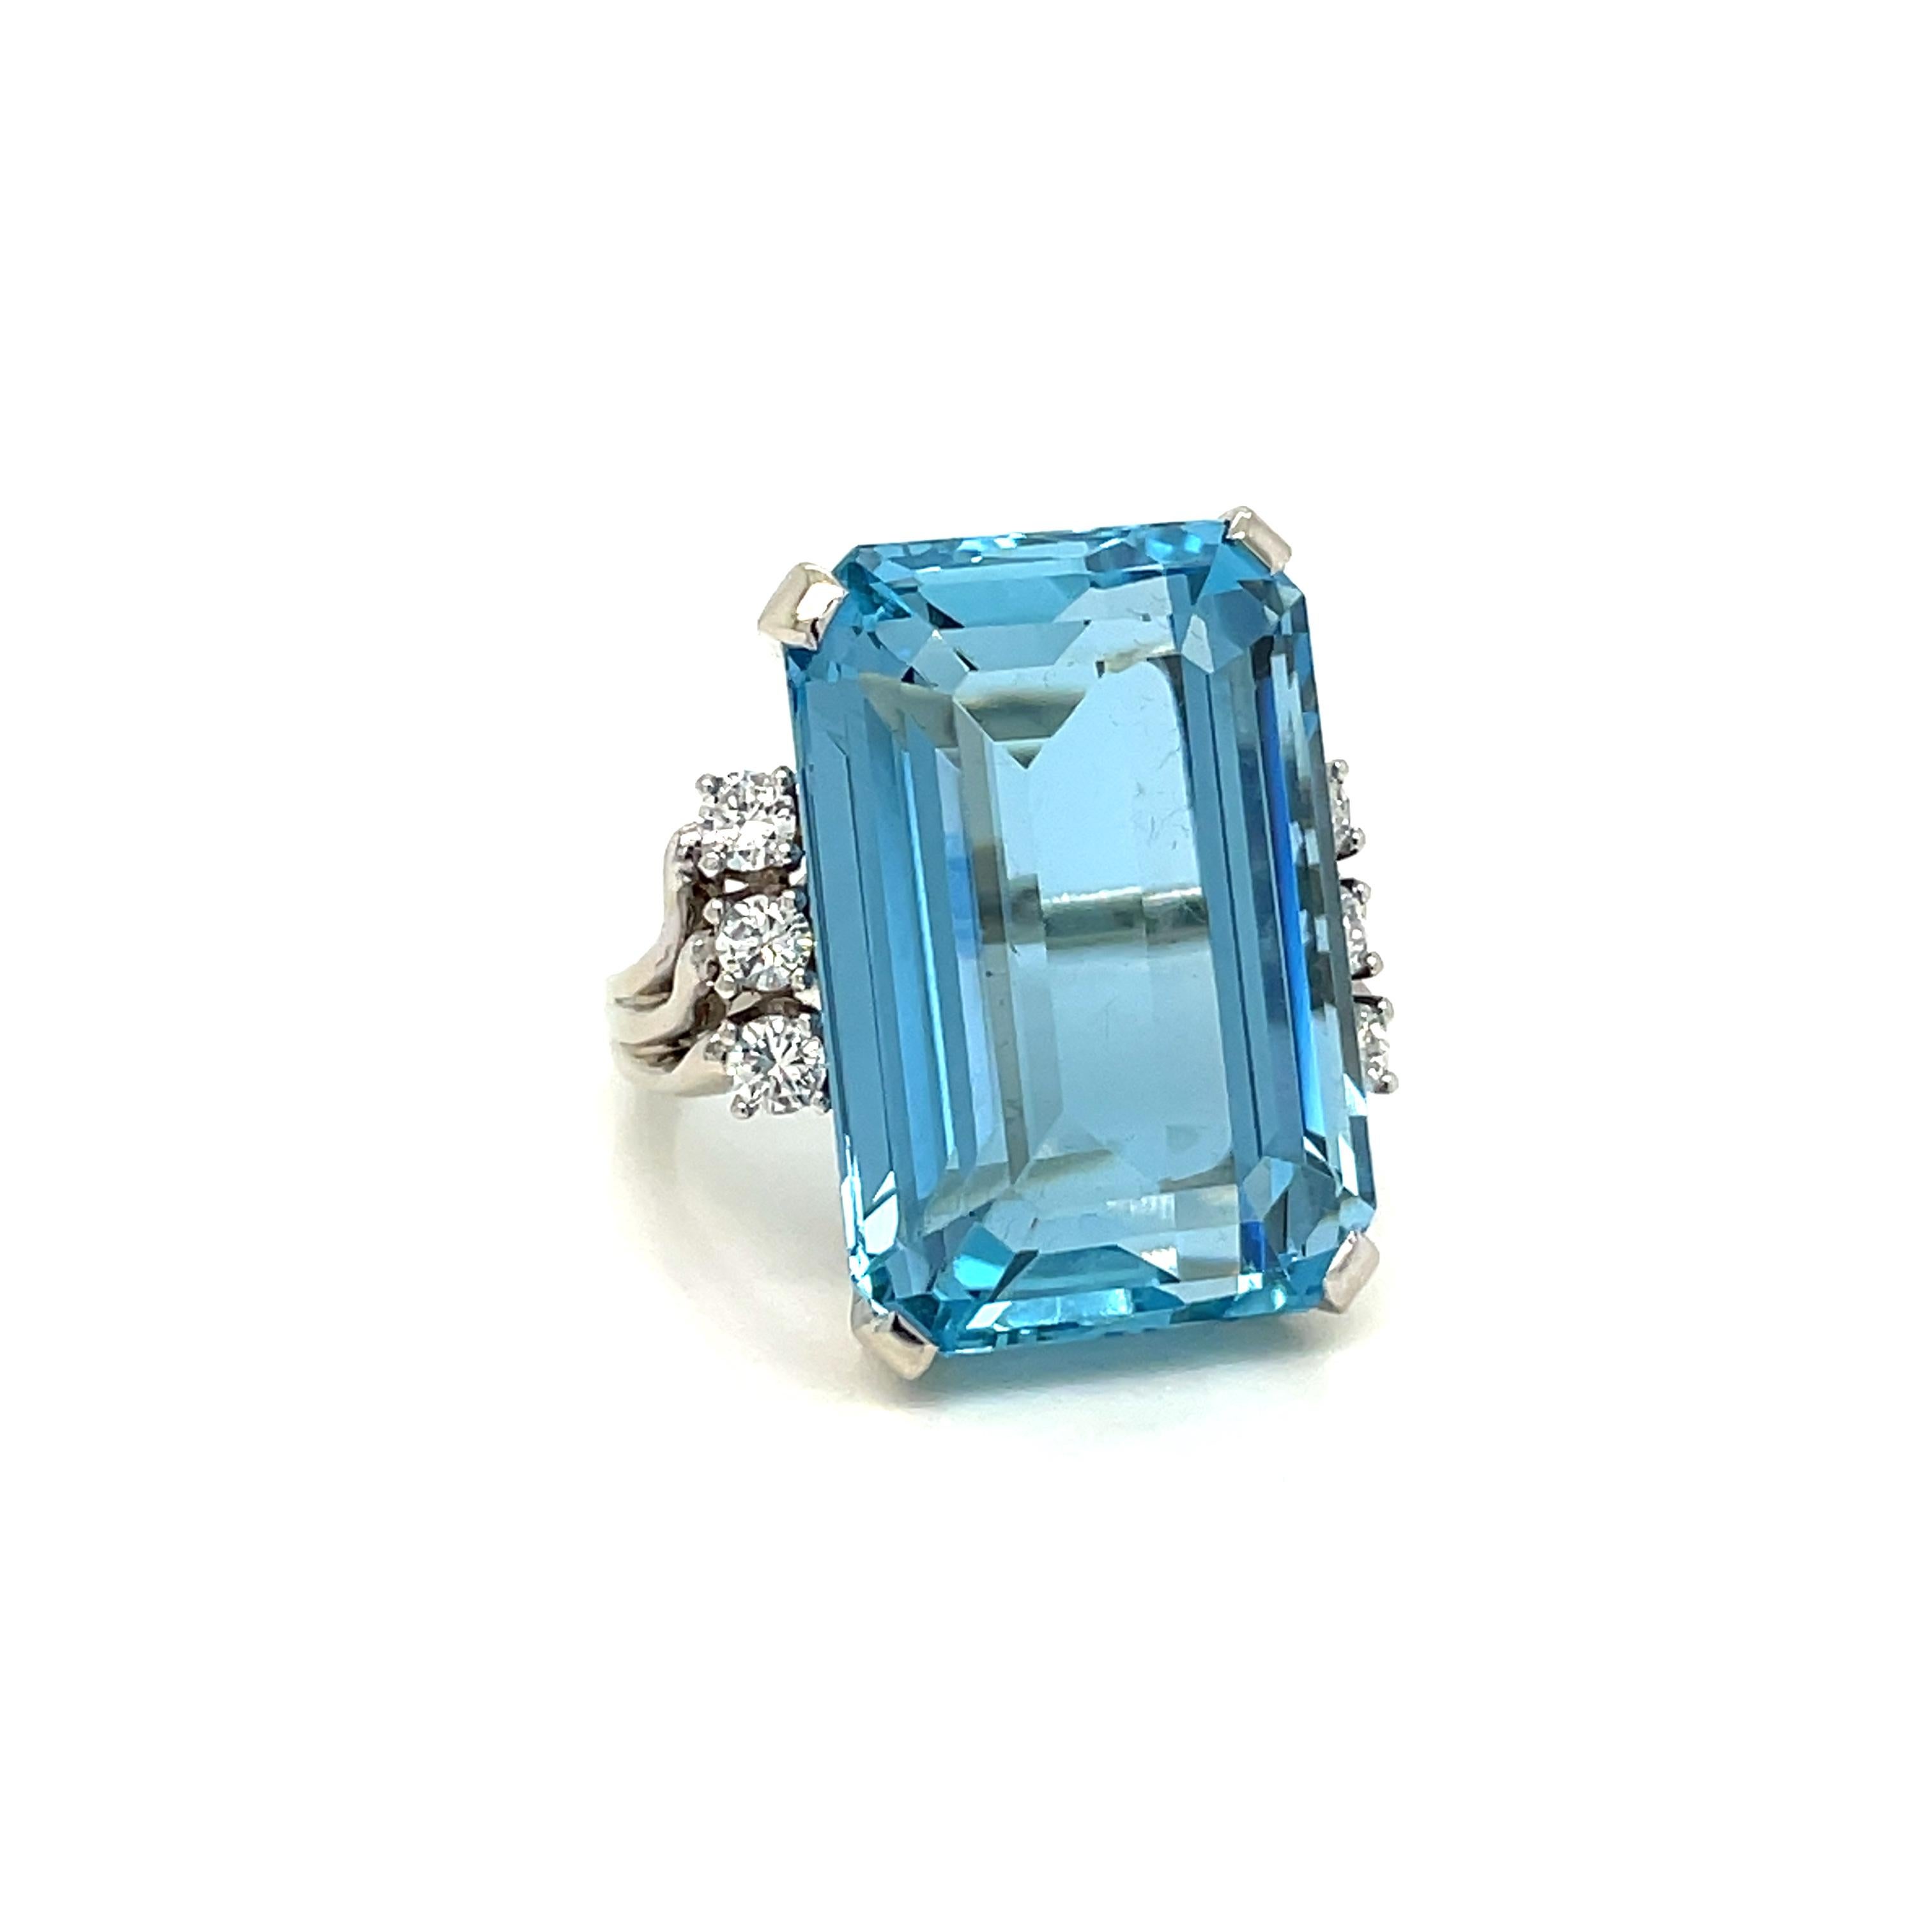 Vintage ring set in the center with a stunning Aquamarine, Santa Maria origin, weighing 24,65 carats graded AAAA, and surrounded by approx. 0,45 carat of round brilliant cut diamonds graded G Color Vvs Clarity, 

CONDITION: Pre-owned -